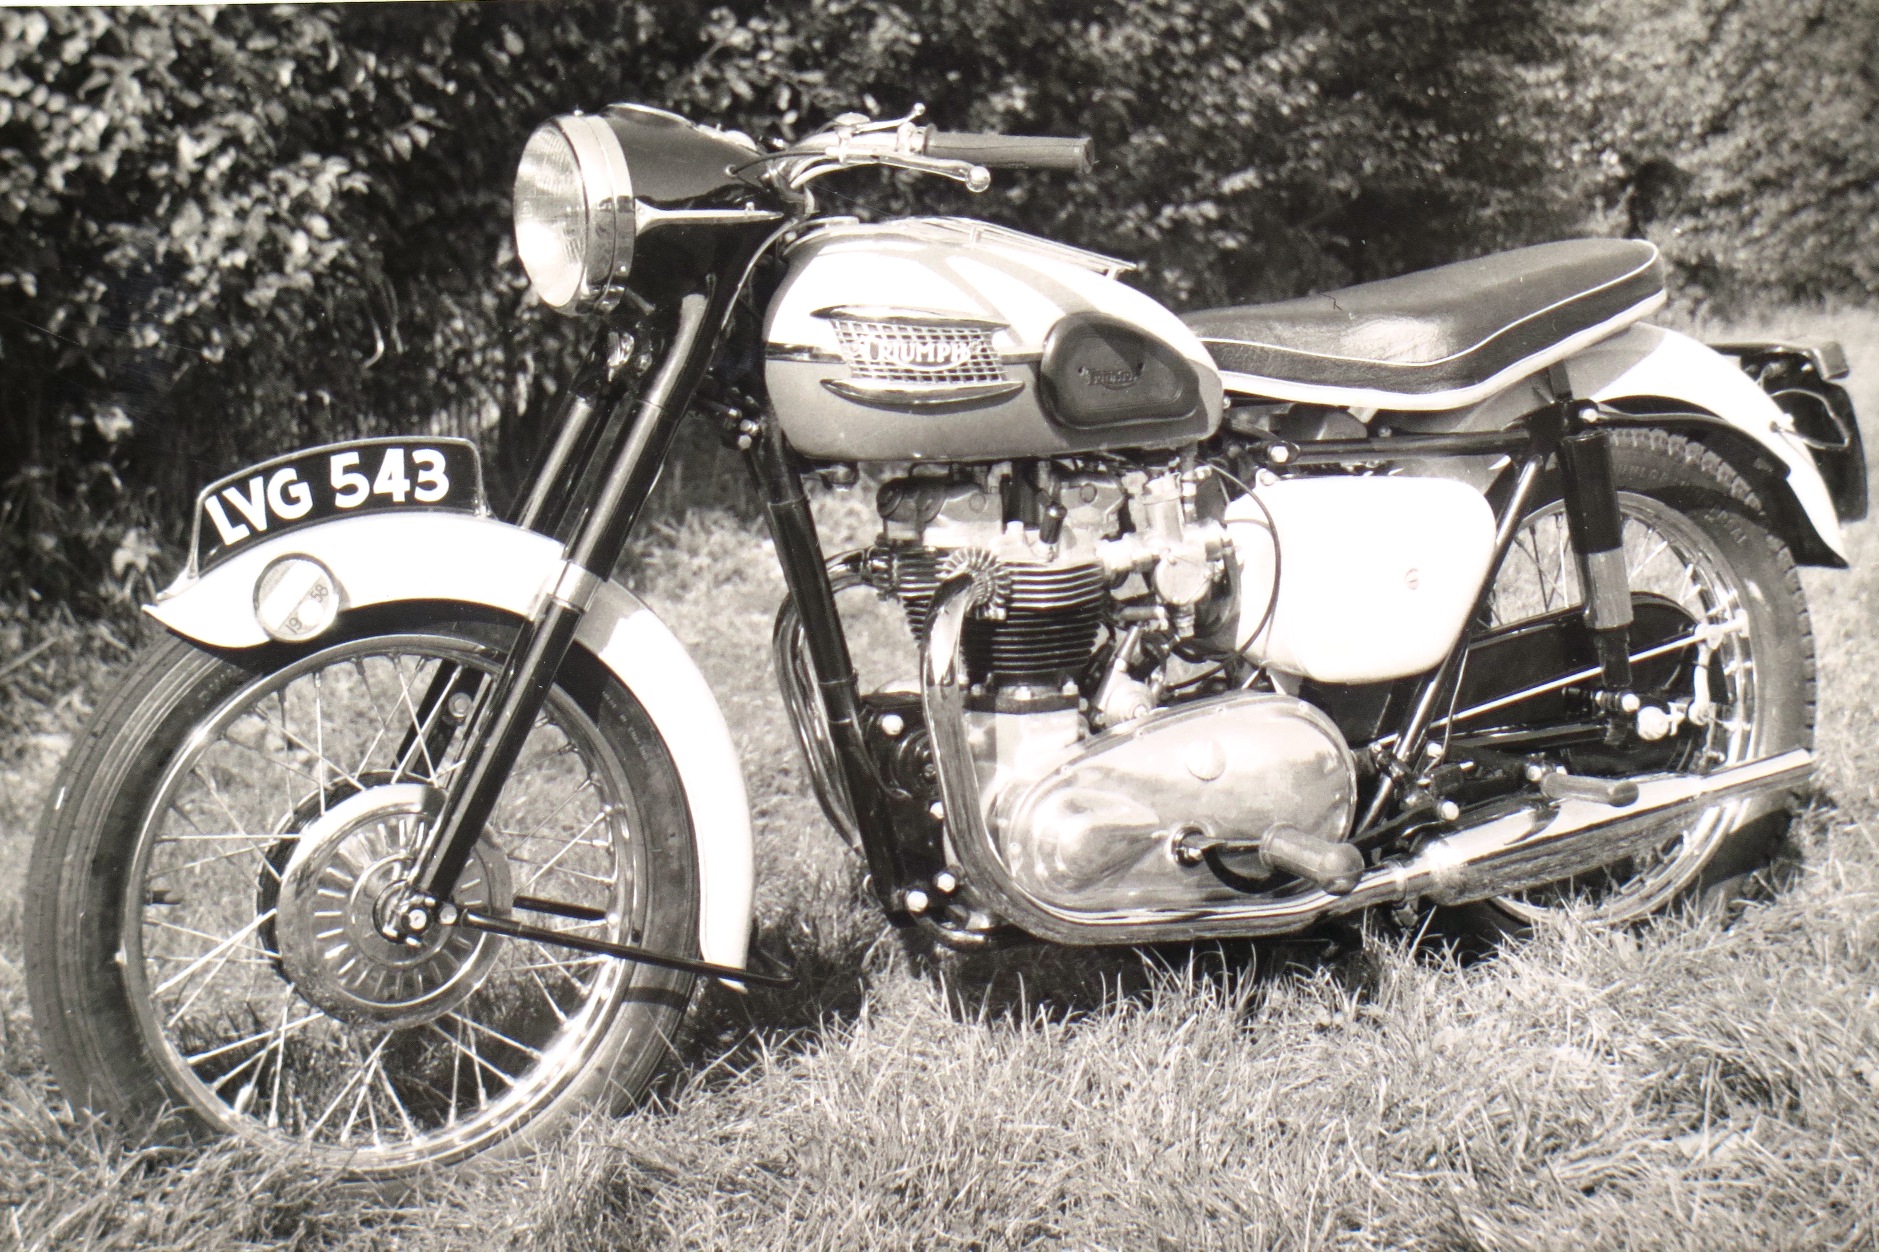 Where is this Bonnevile T120 1958? - Photo taken by Brian Goddard on the day of delivery in 1958